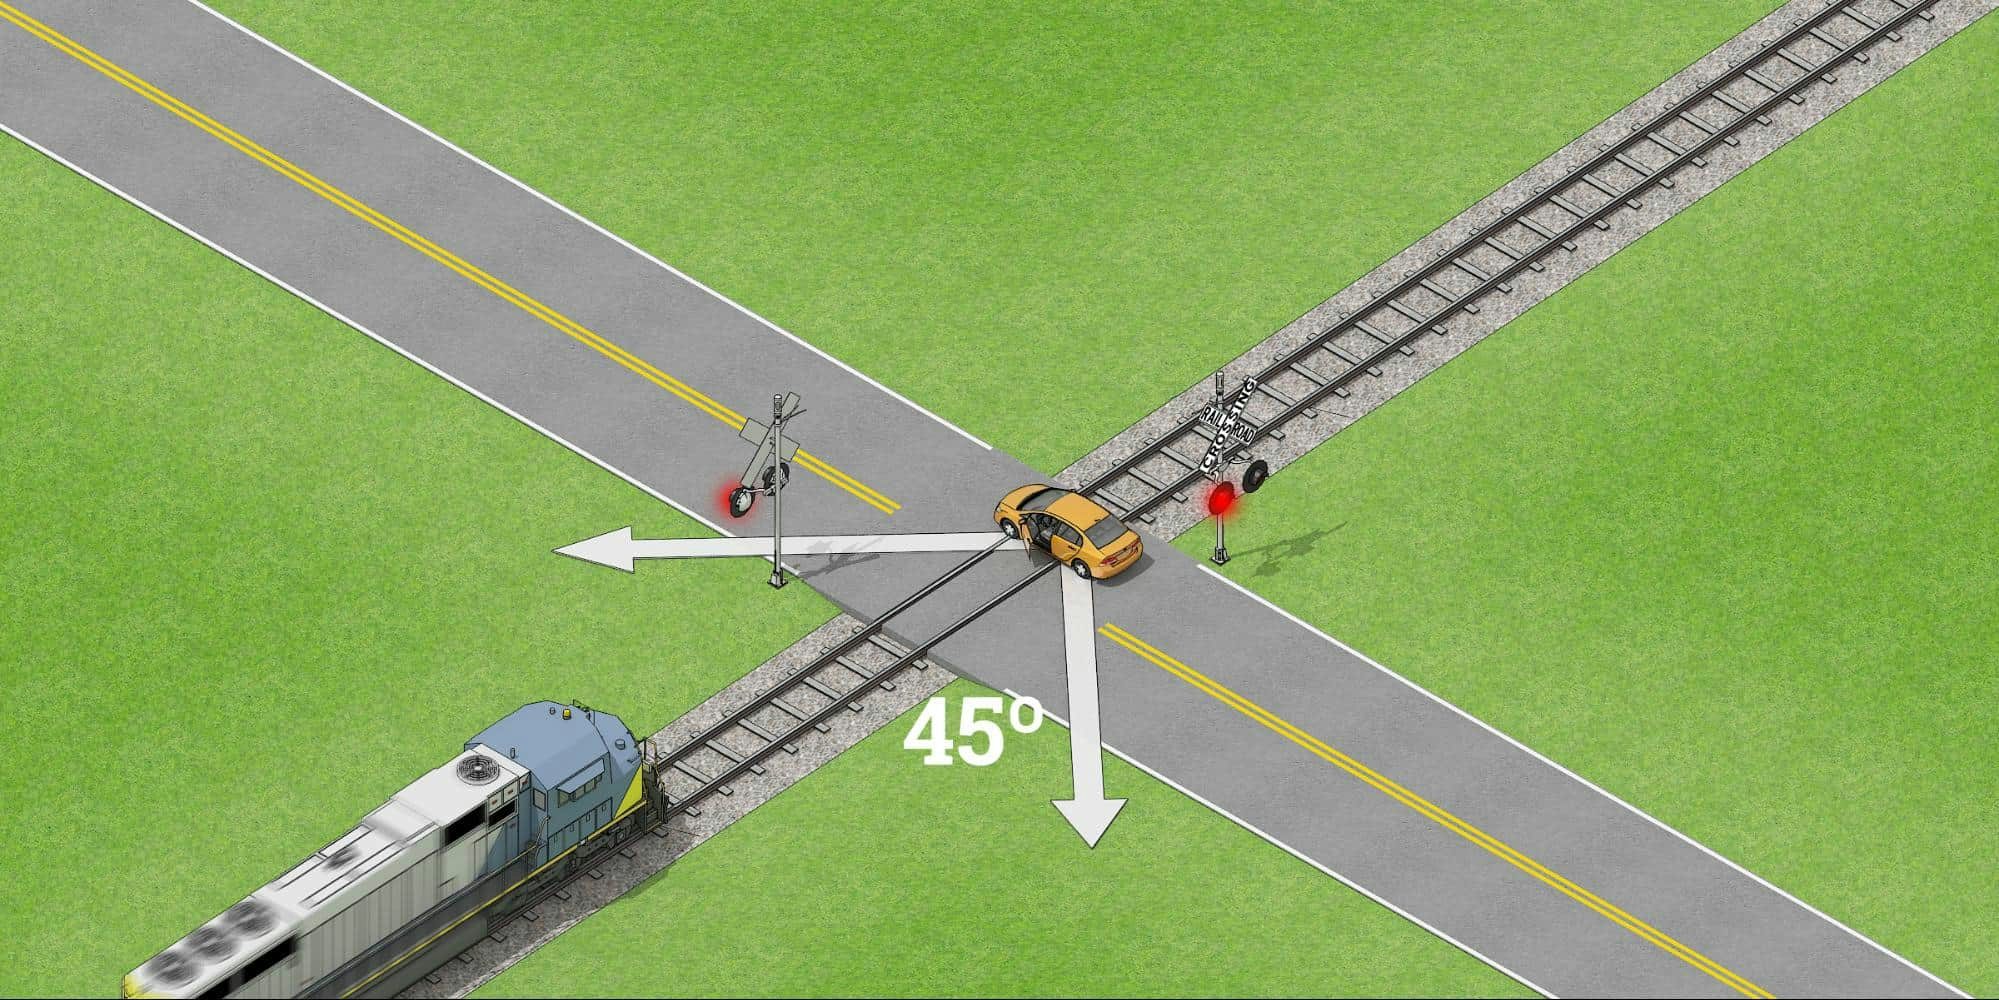 instructions how to run away if vehicle stalls on the railroad tracks